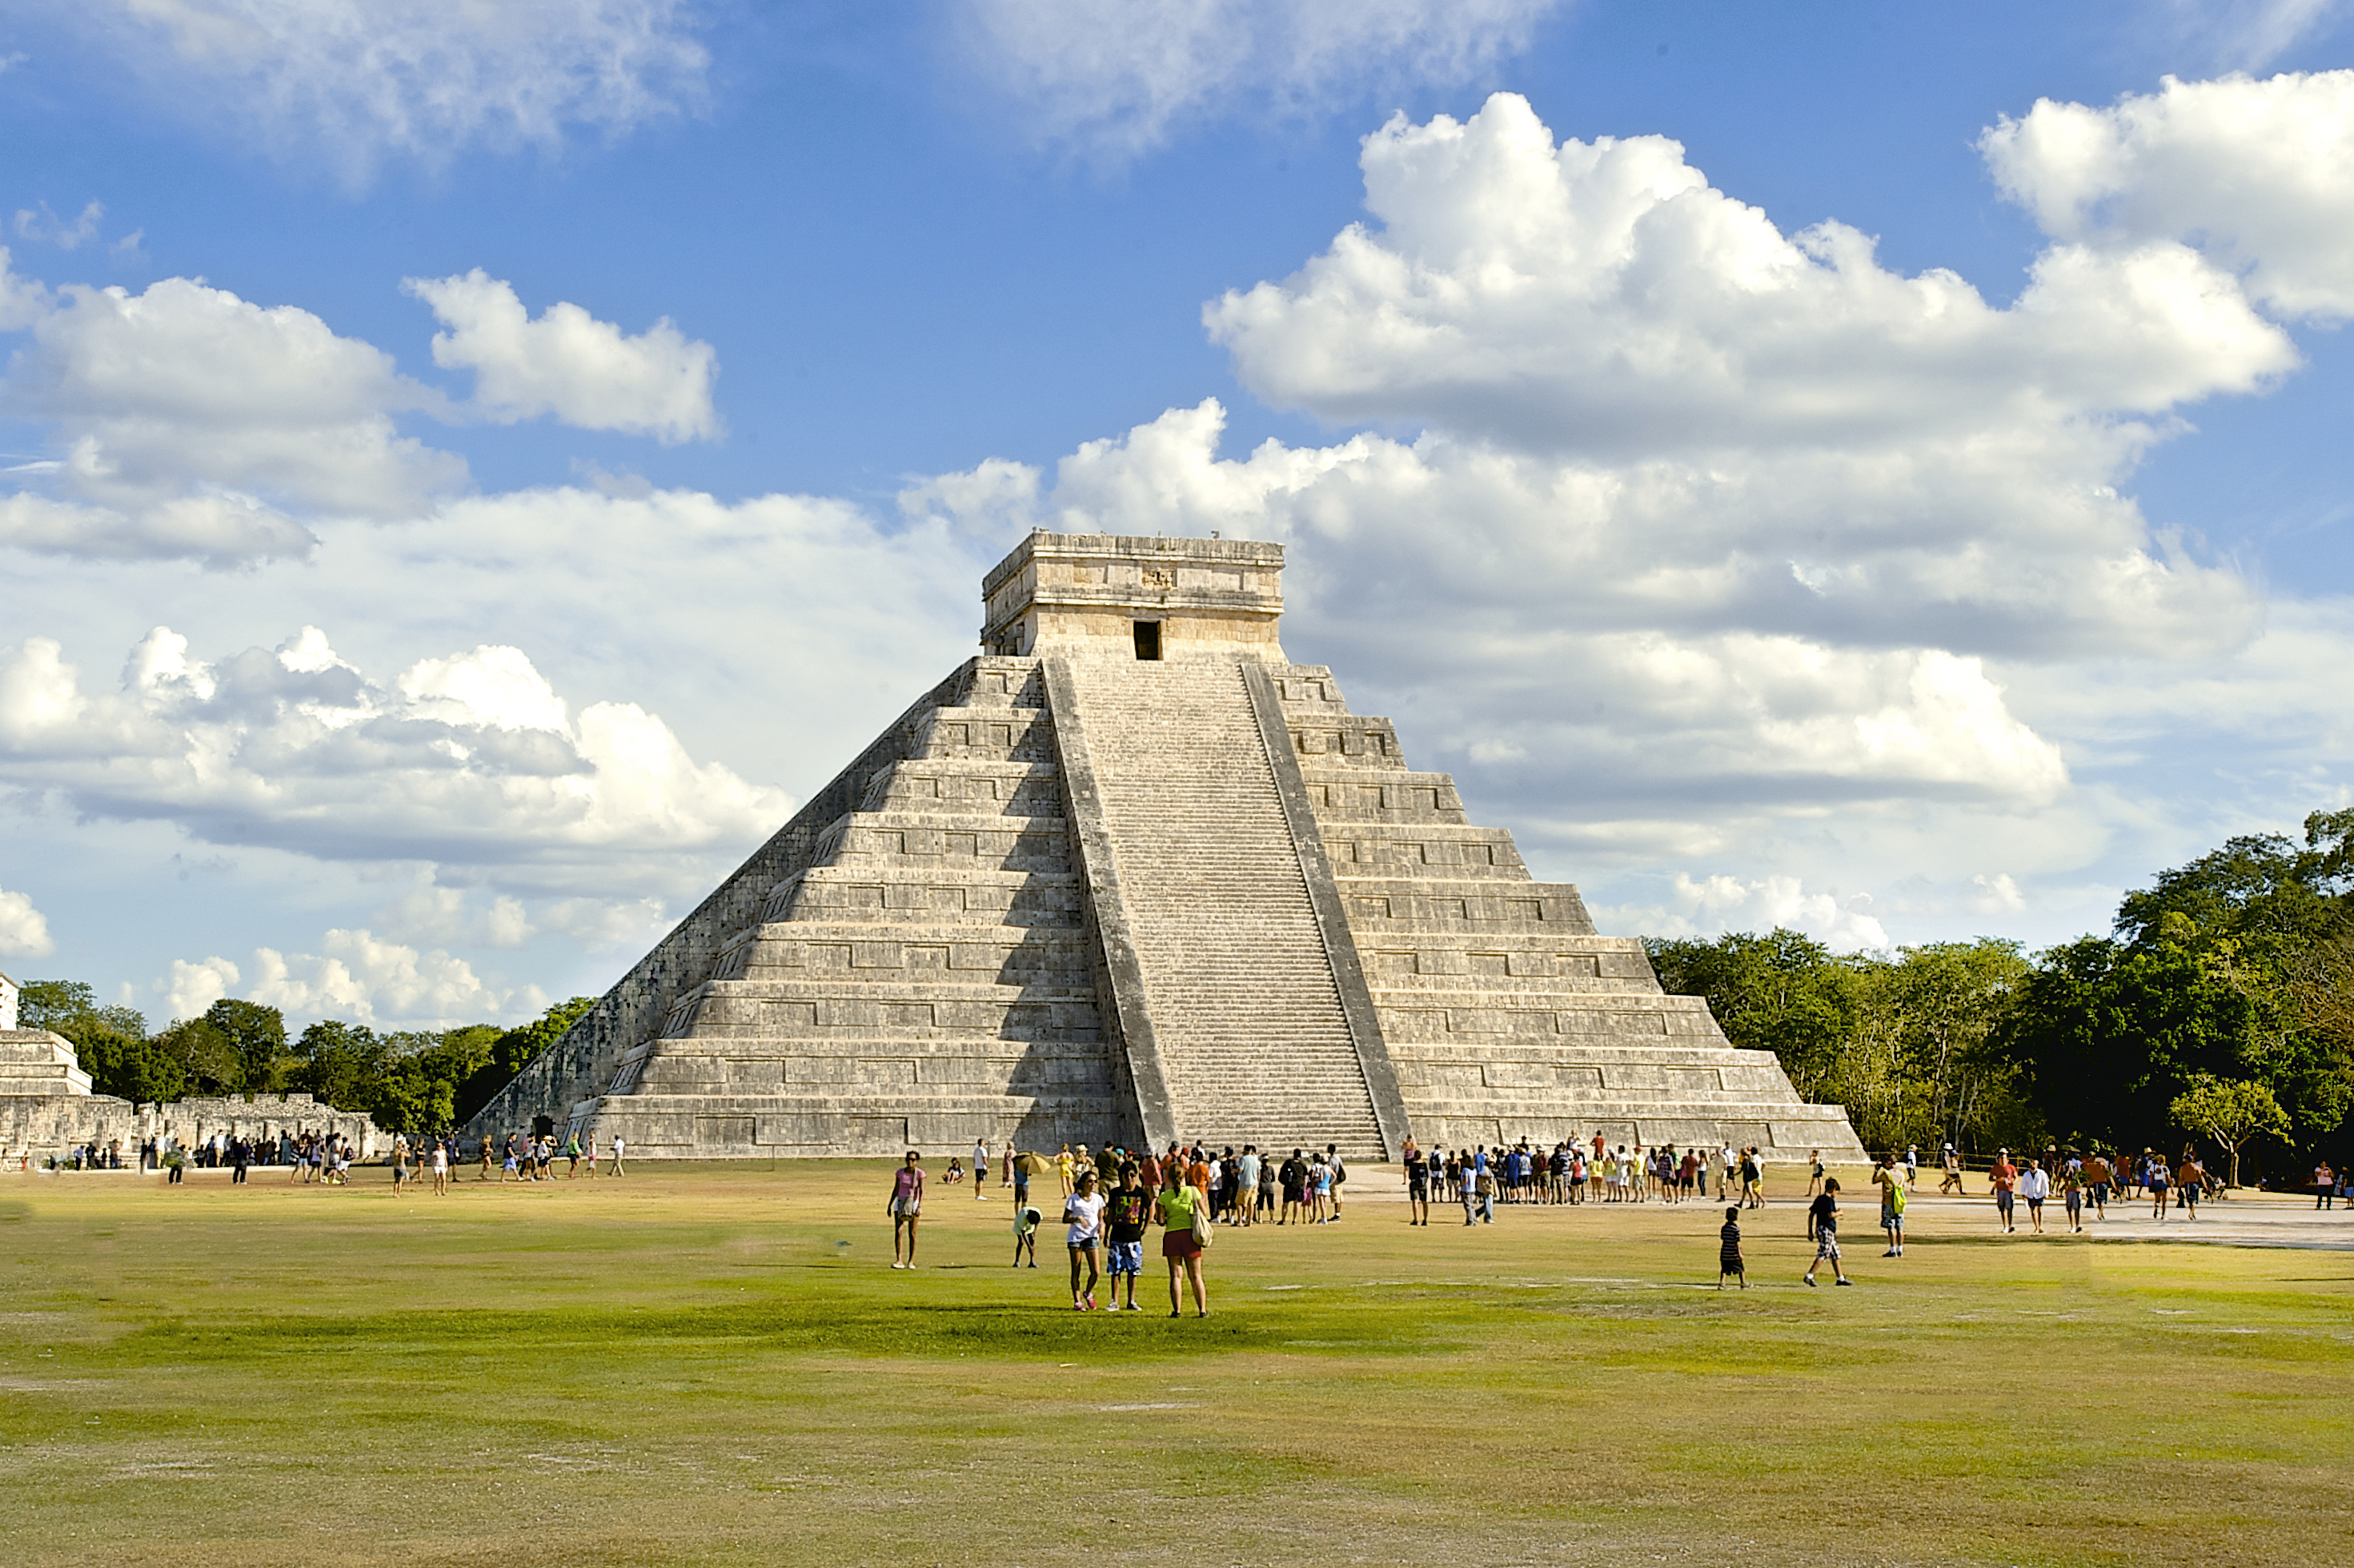 The Chichen Itza Maya ruins in Mexico were also on Kanye's radar before being told there was no chance of it happening